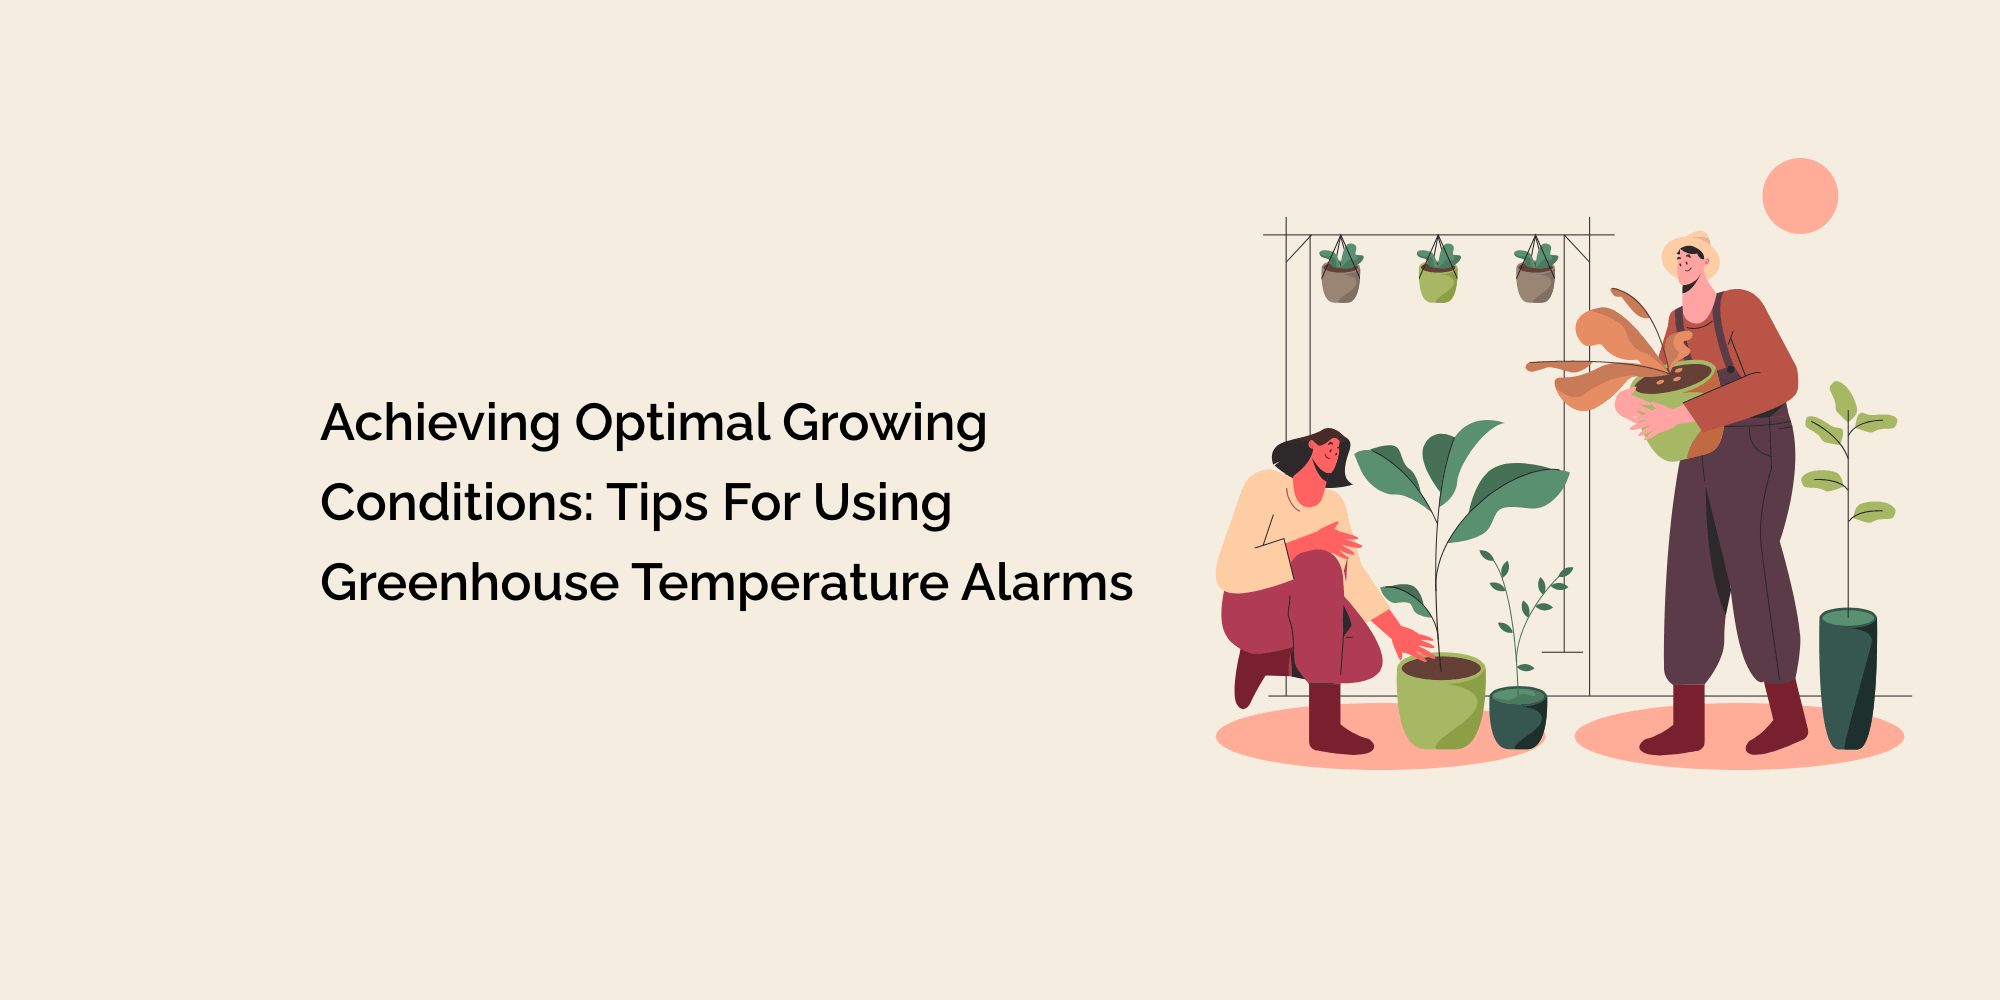 Achieving Optimal Growing Conditions: Tips for Using Greenhouse Temperature Alarms